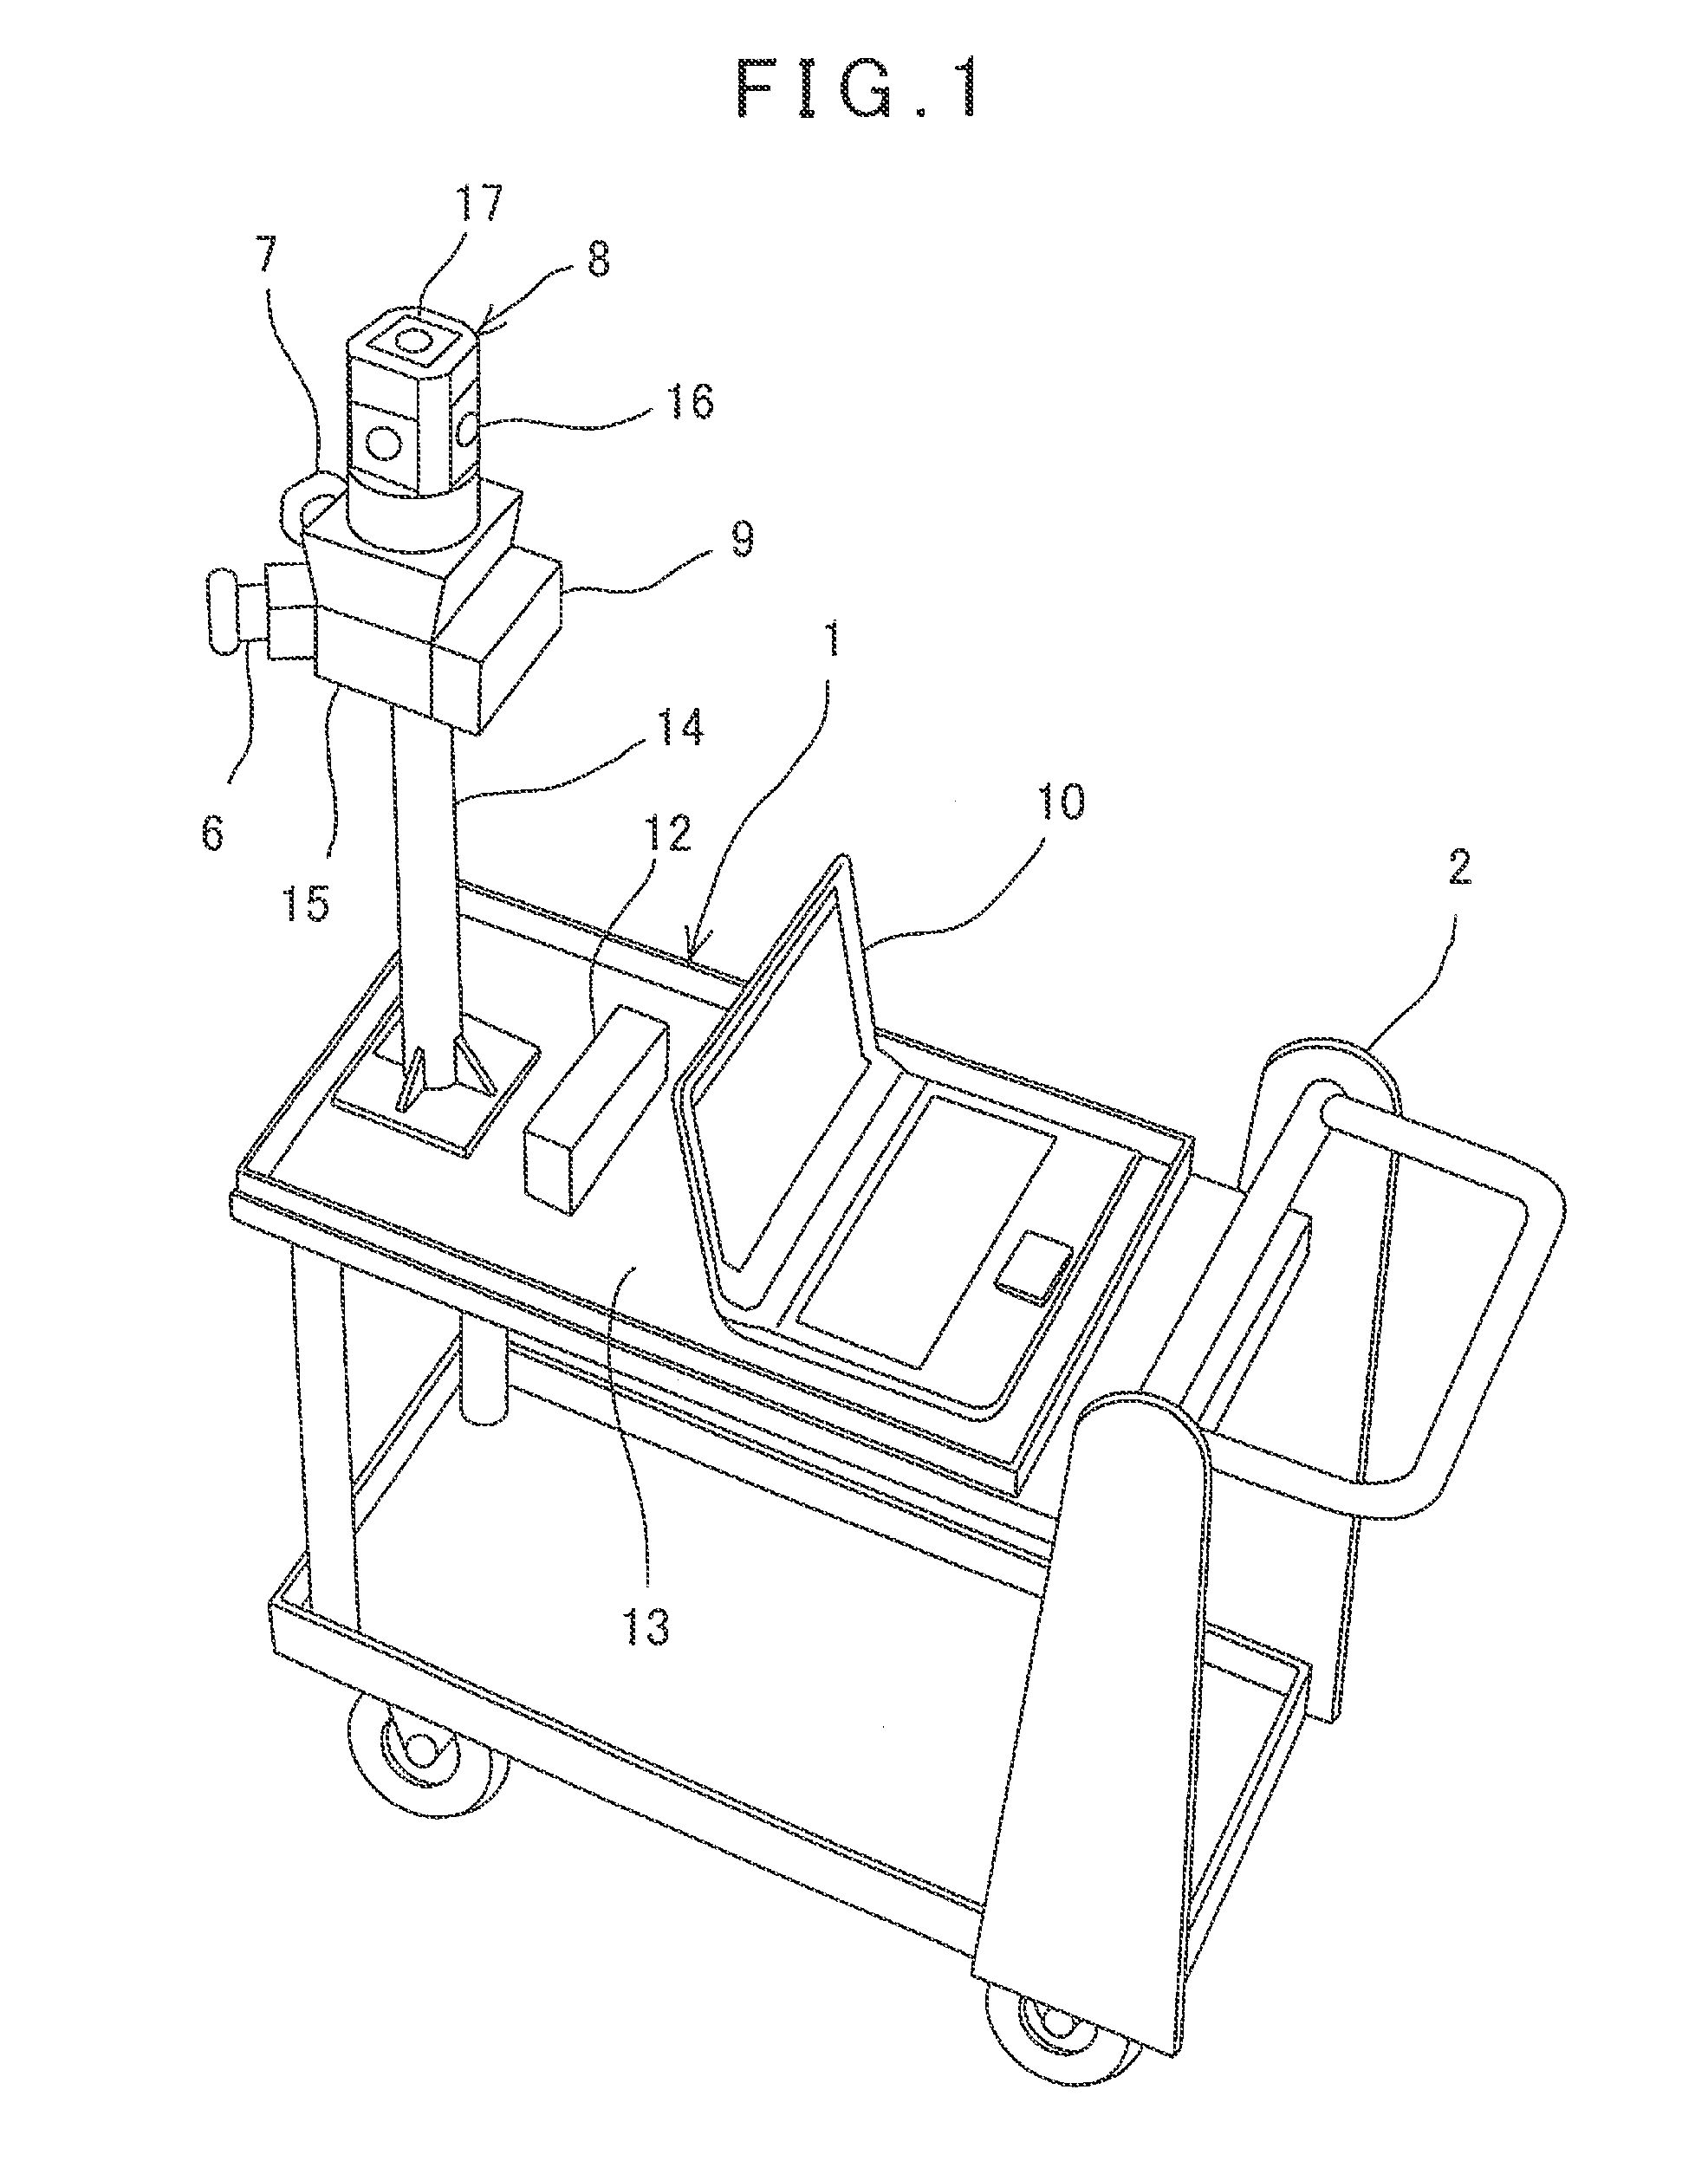 Measuring instrument for preparing three-dimensional point cloud model